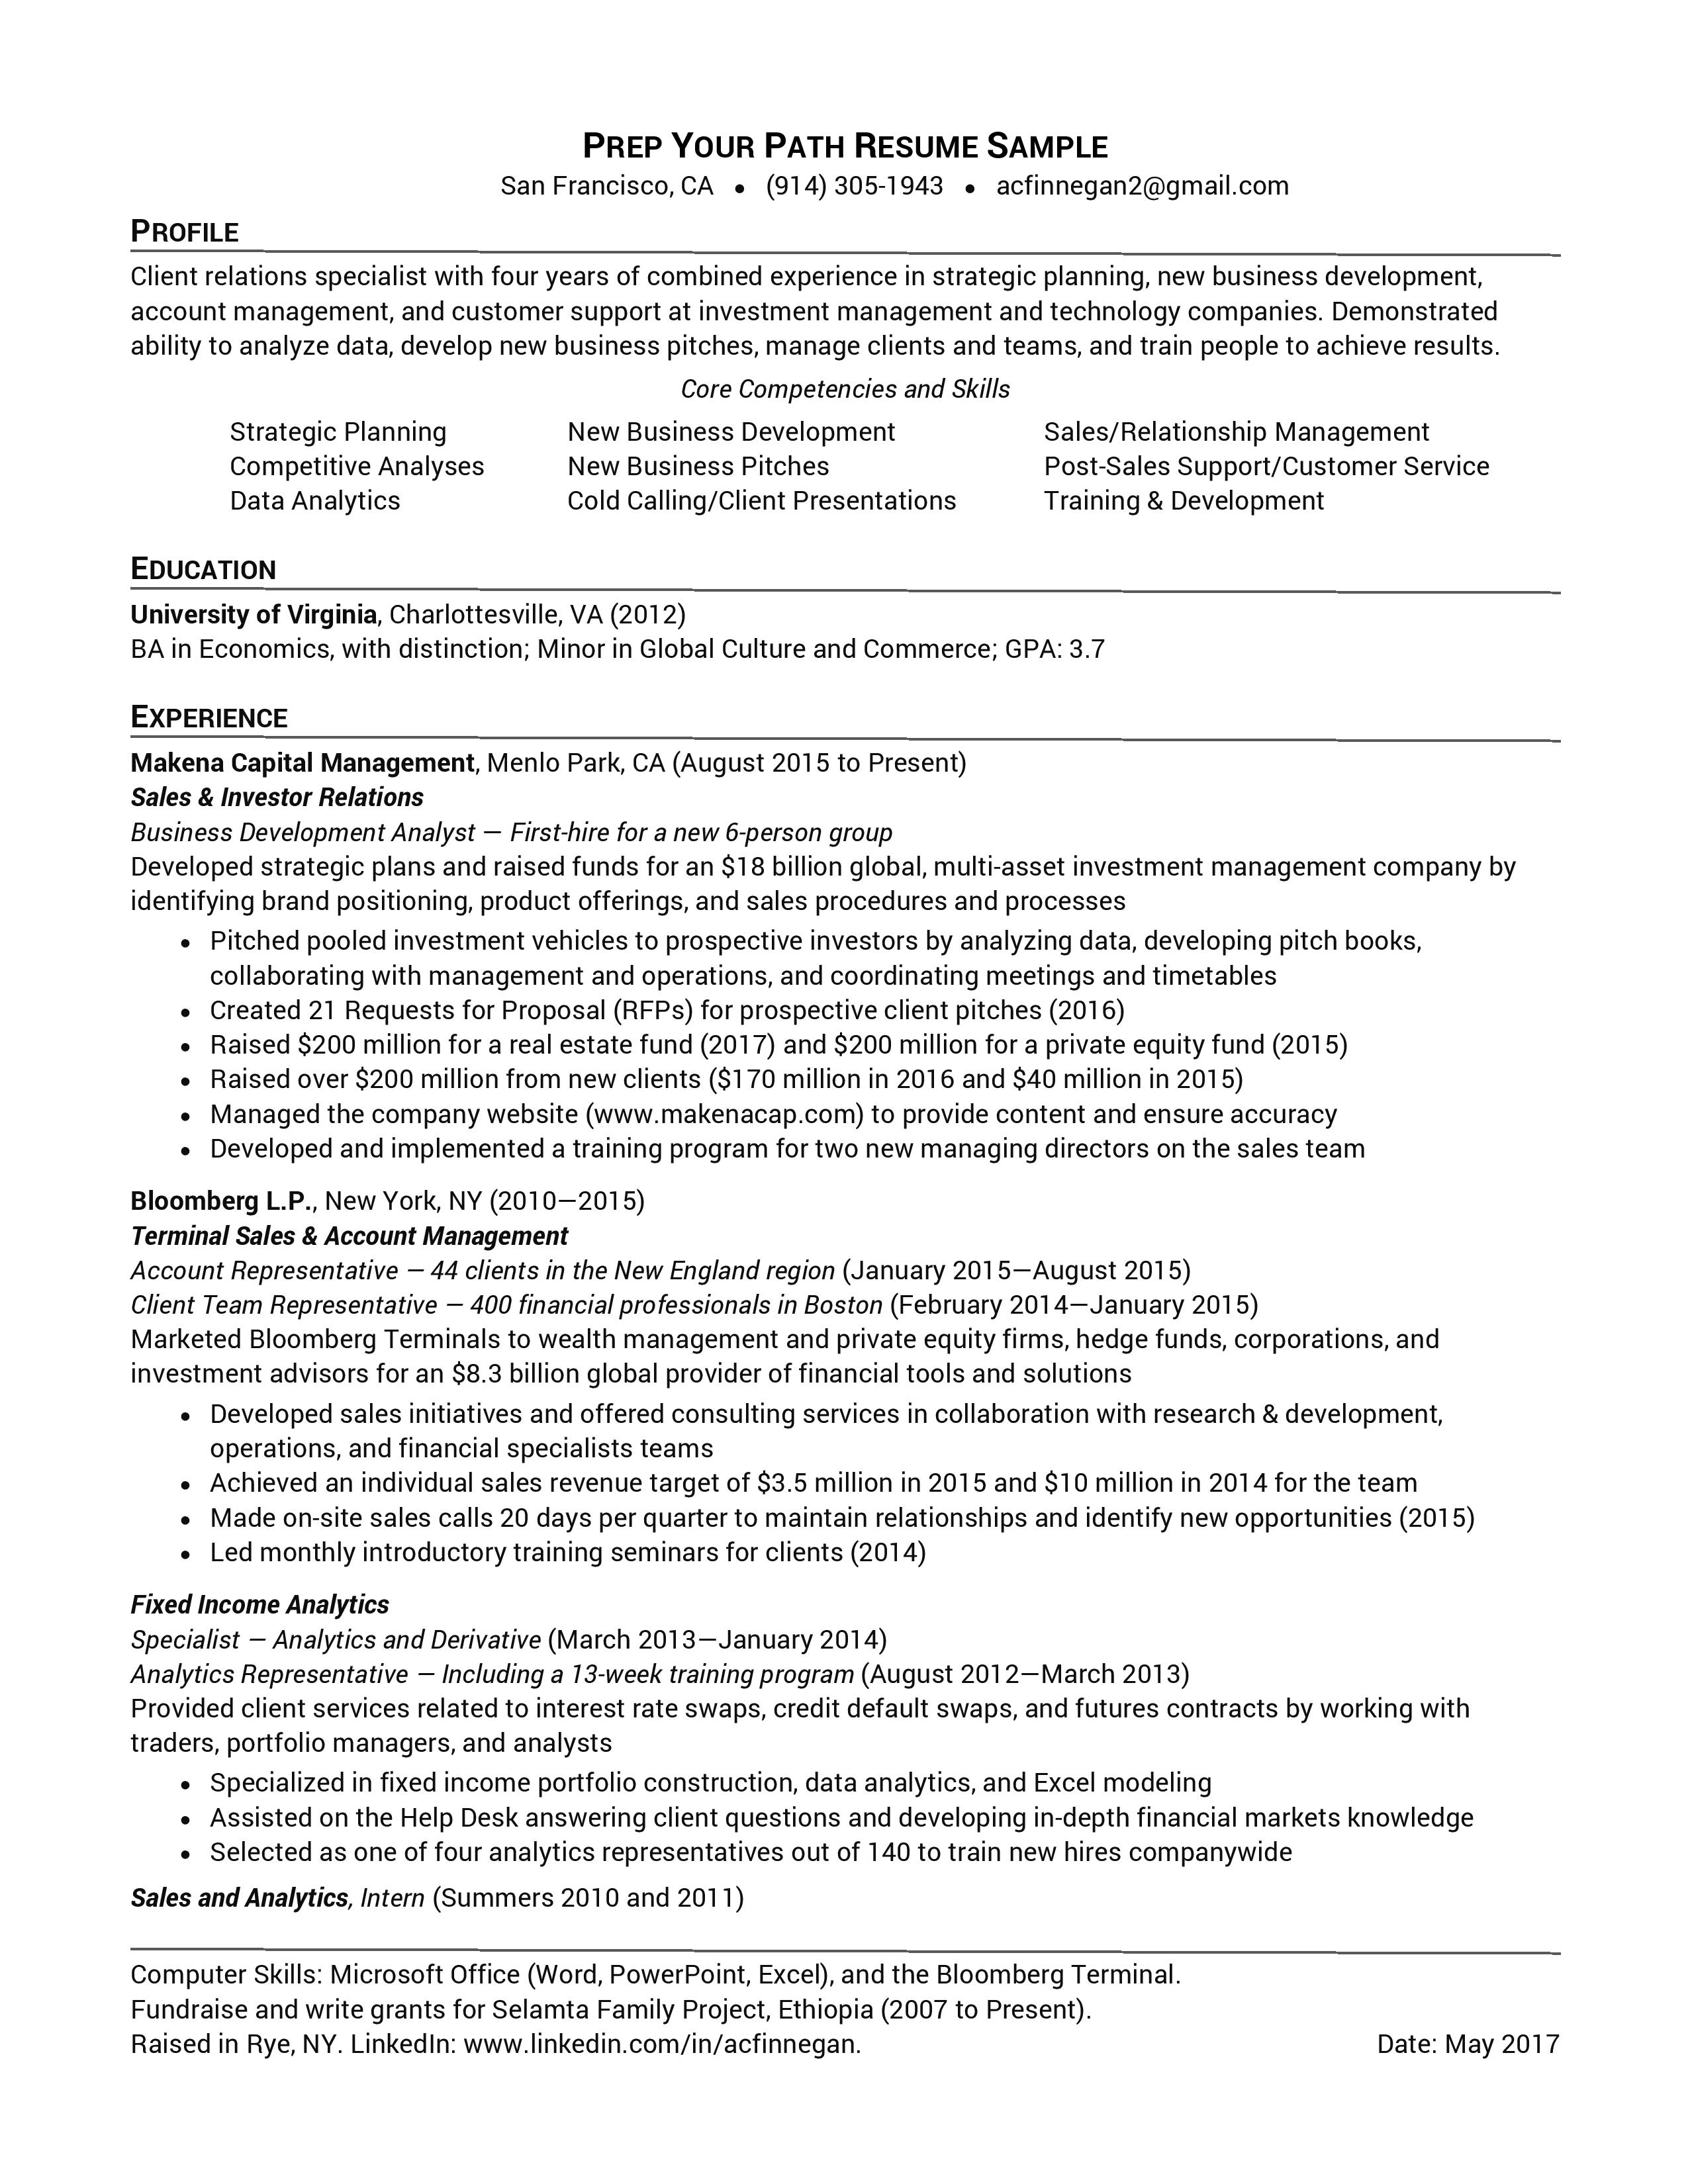 Young Professional Resume - Finance